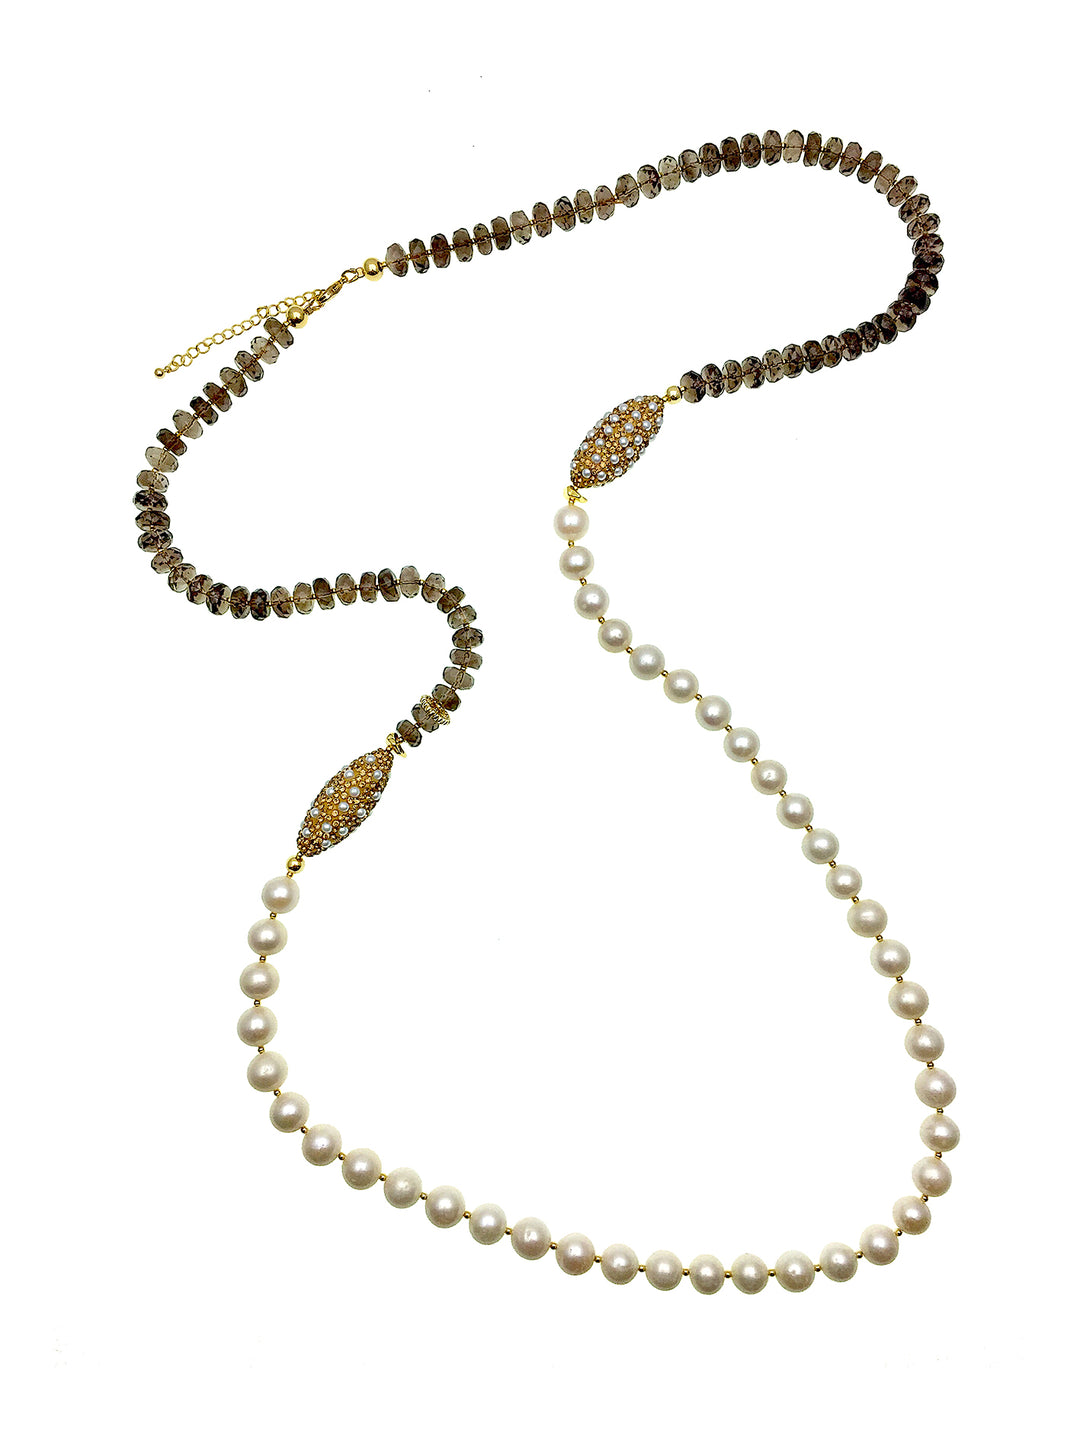 Smoky Quartz With Freshwater Pearls Multi-Way Necklace AN021 - FARRA